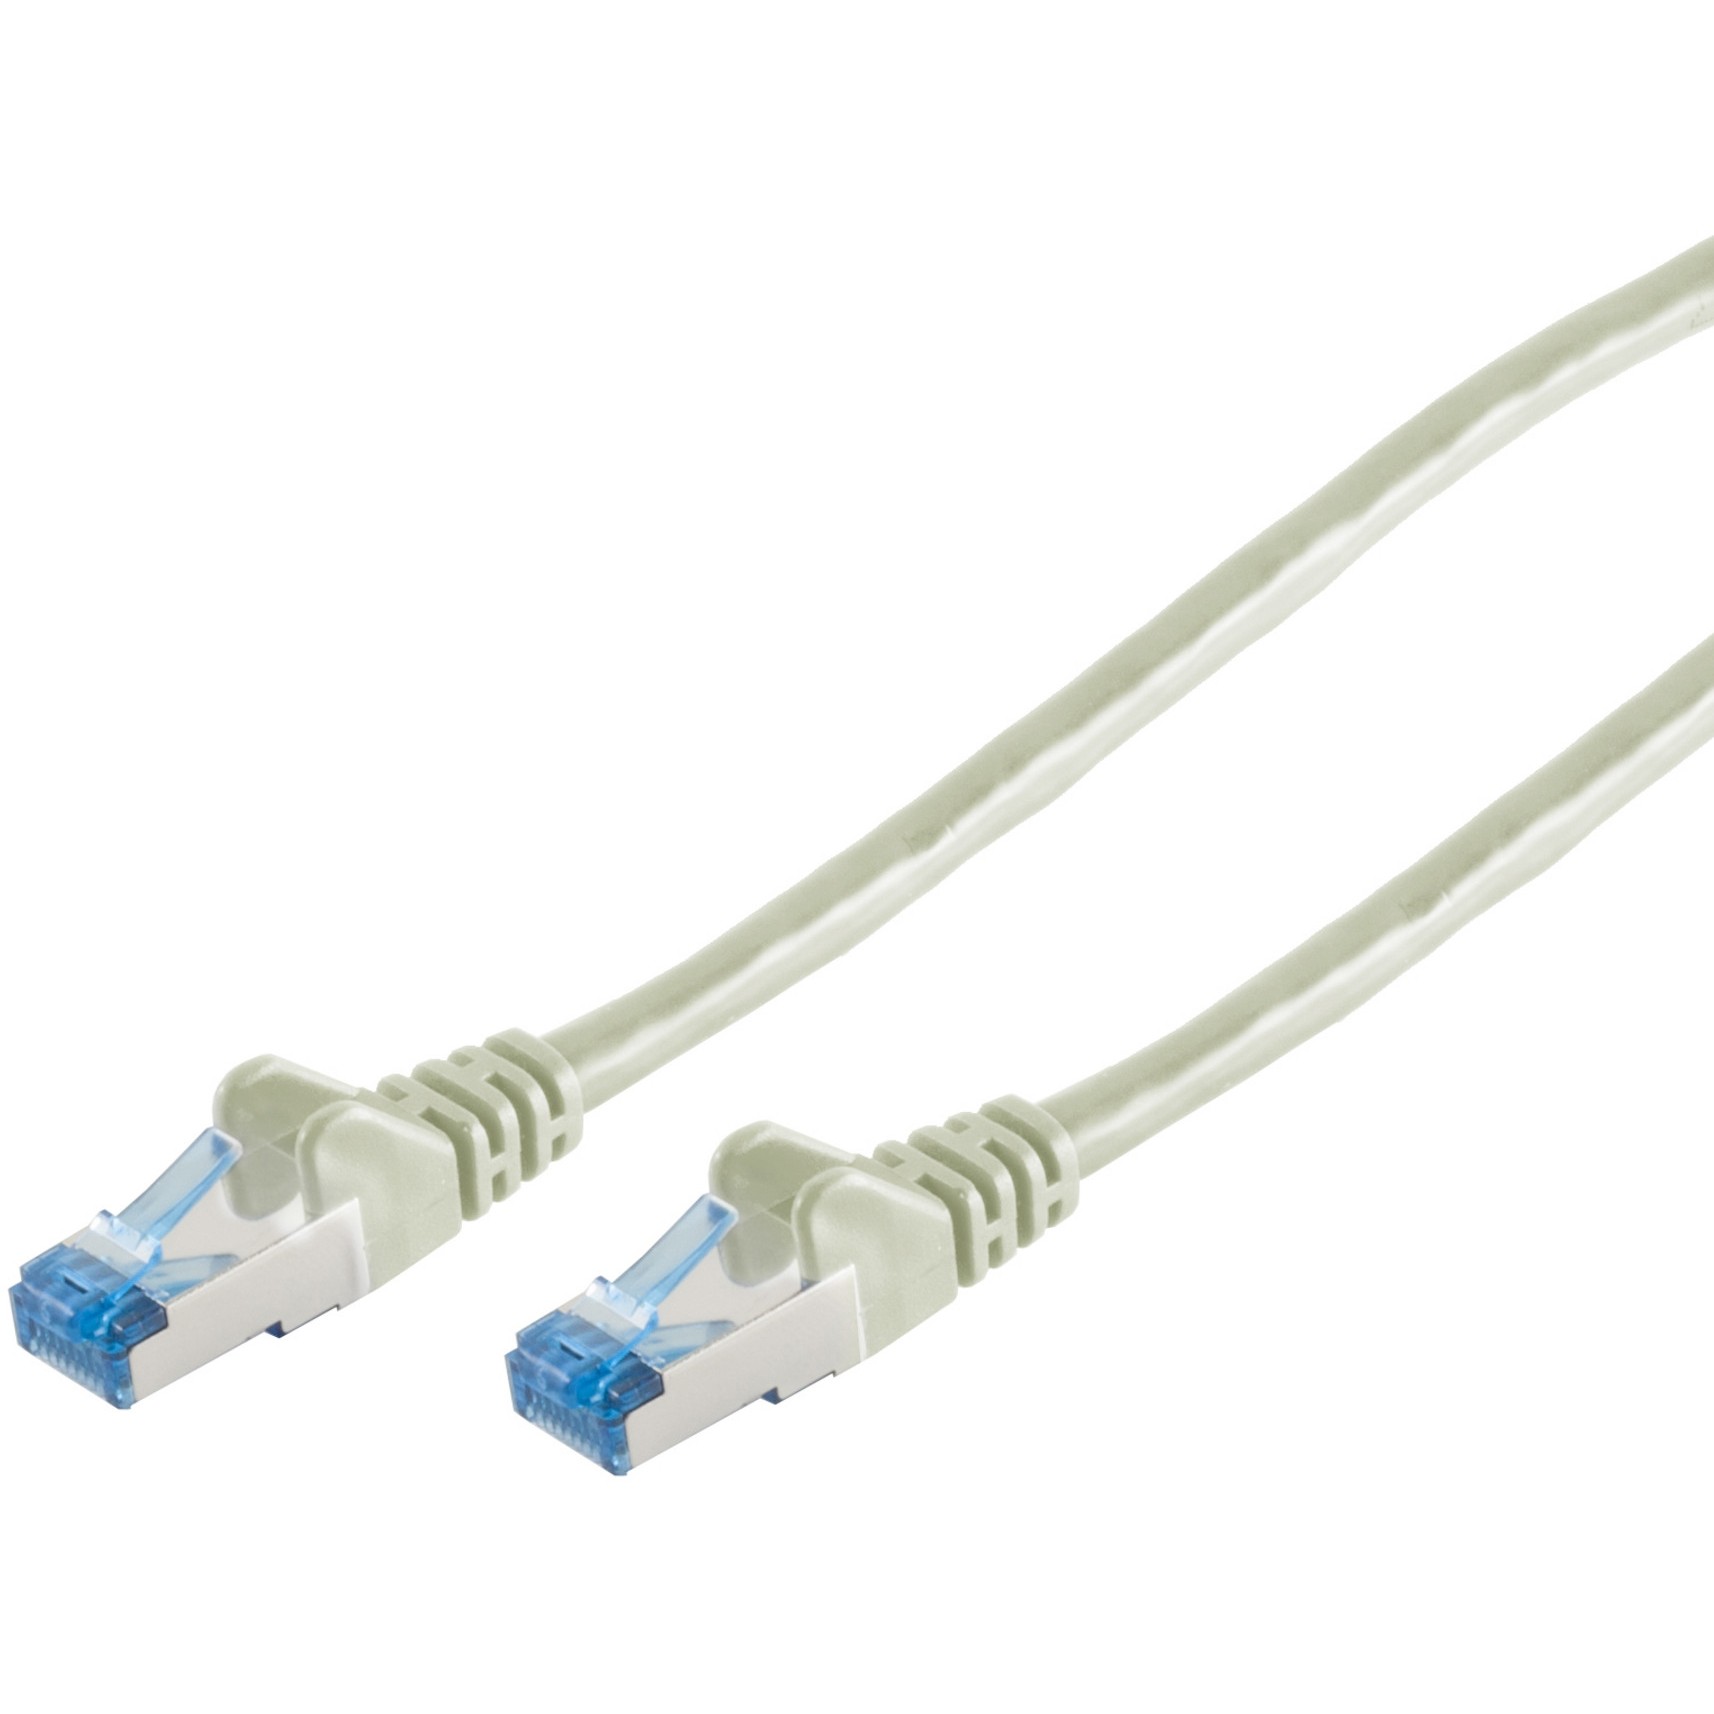 S-Conn 75712 networking cable